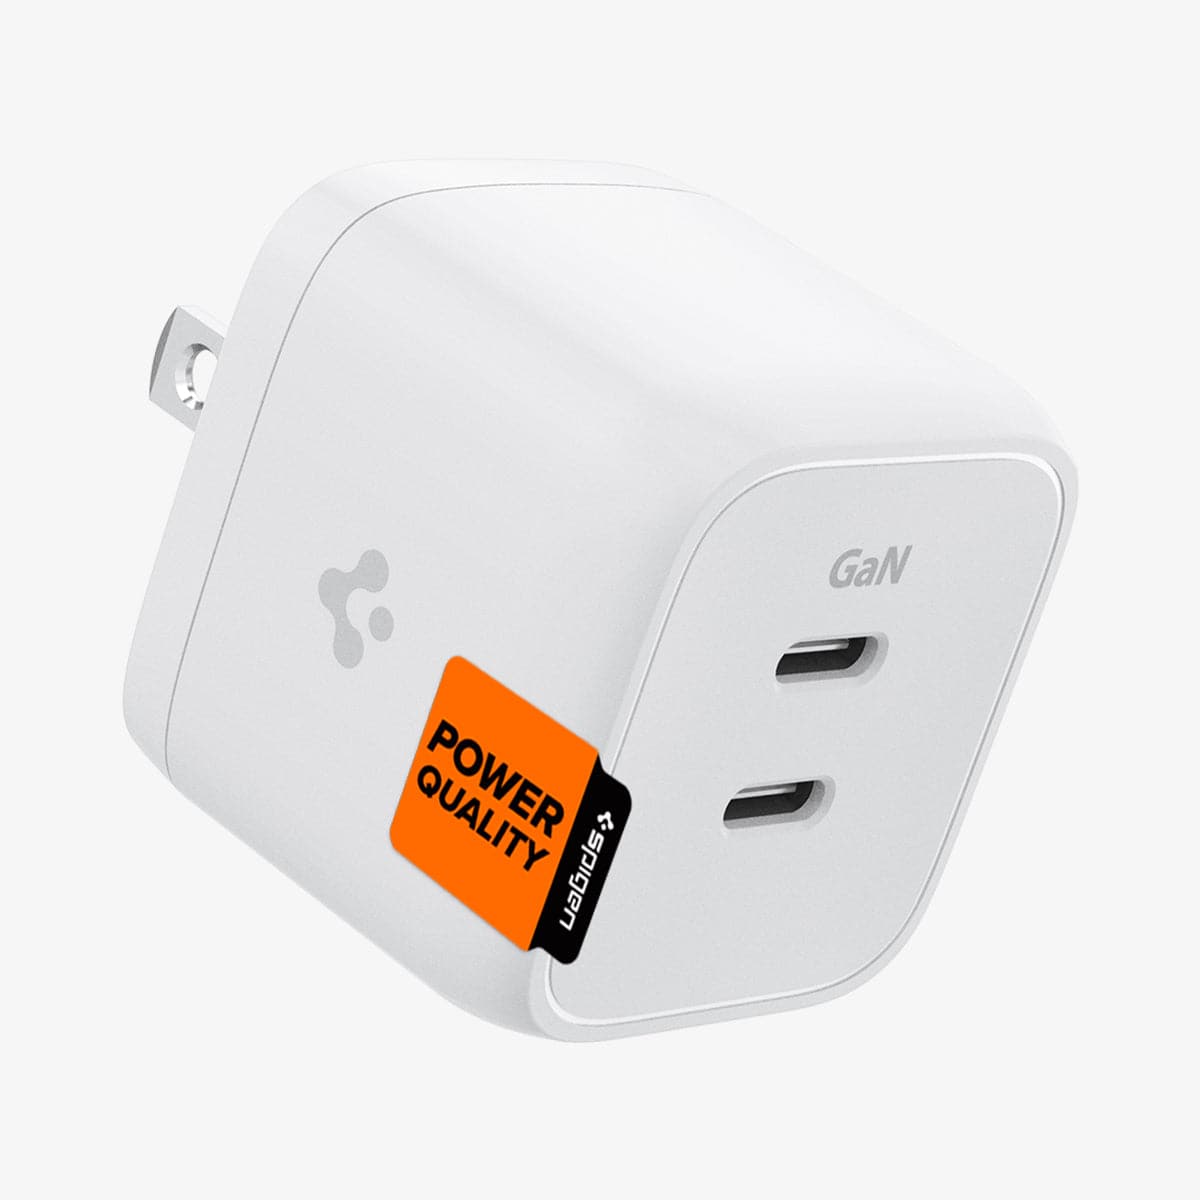 ACH03713 - ArcStation™ Pro GaN 352 Dual USB-C Wall Charger in white showing the side, top and front with power quality sticker